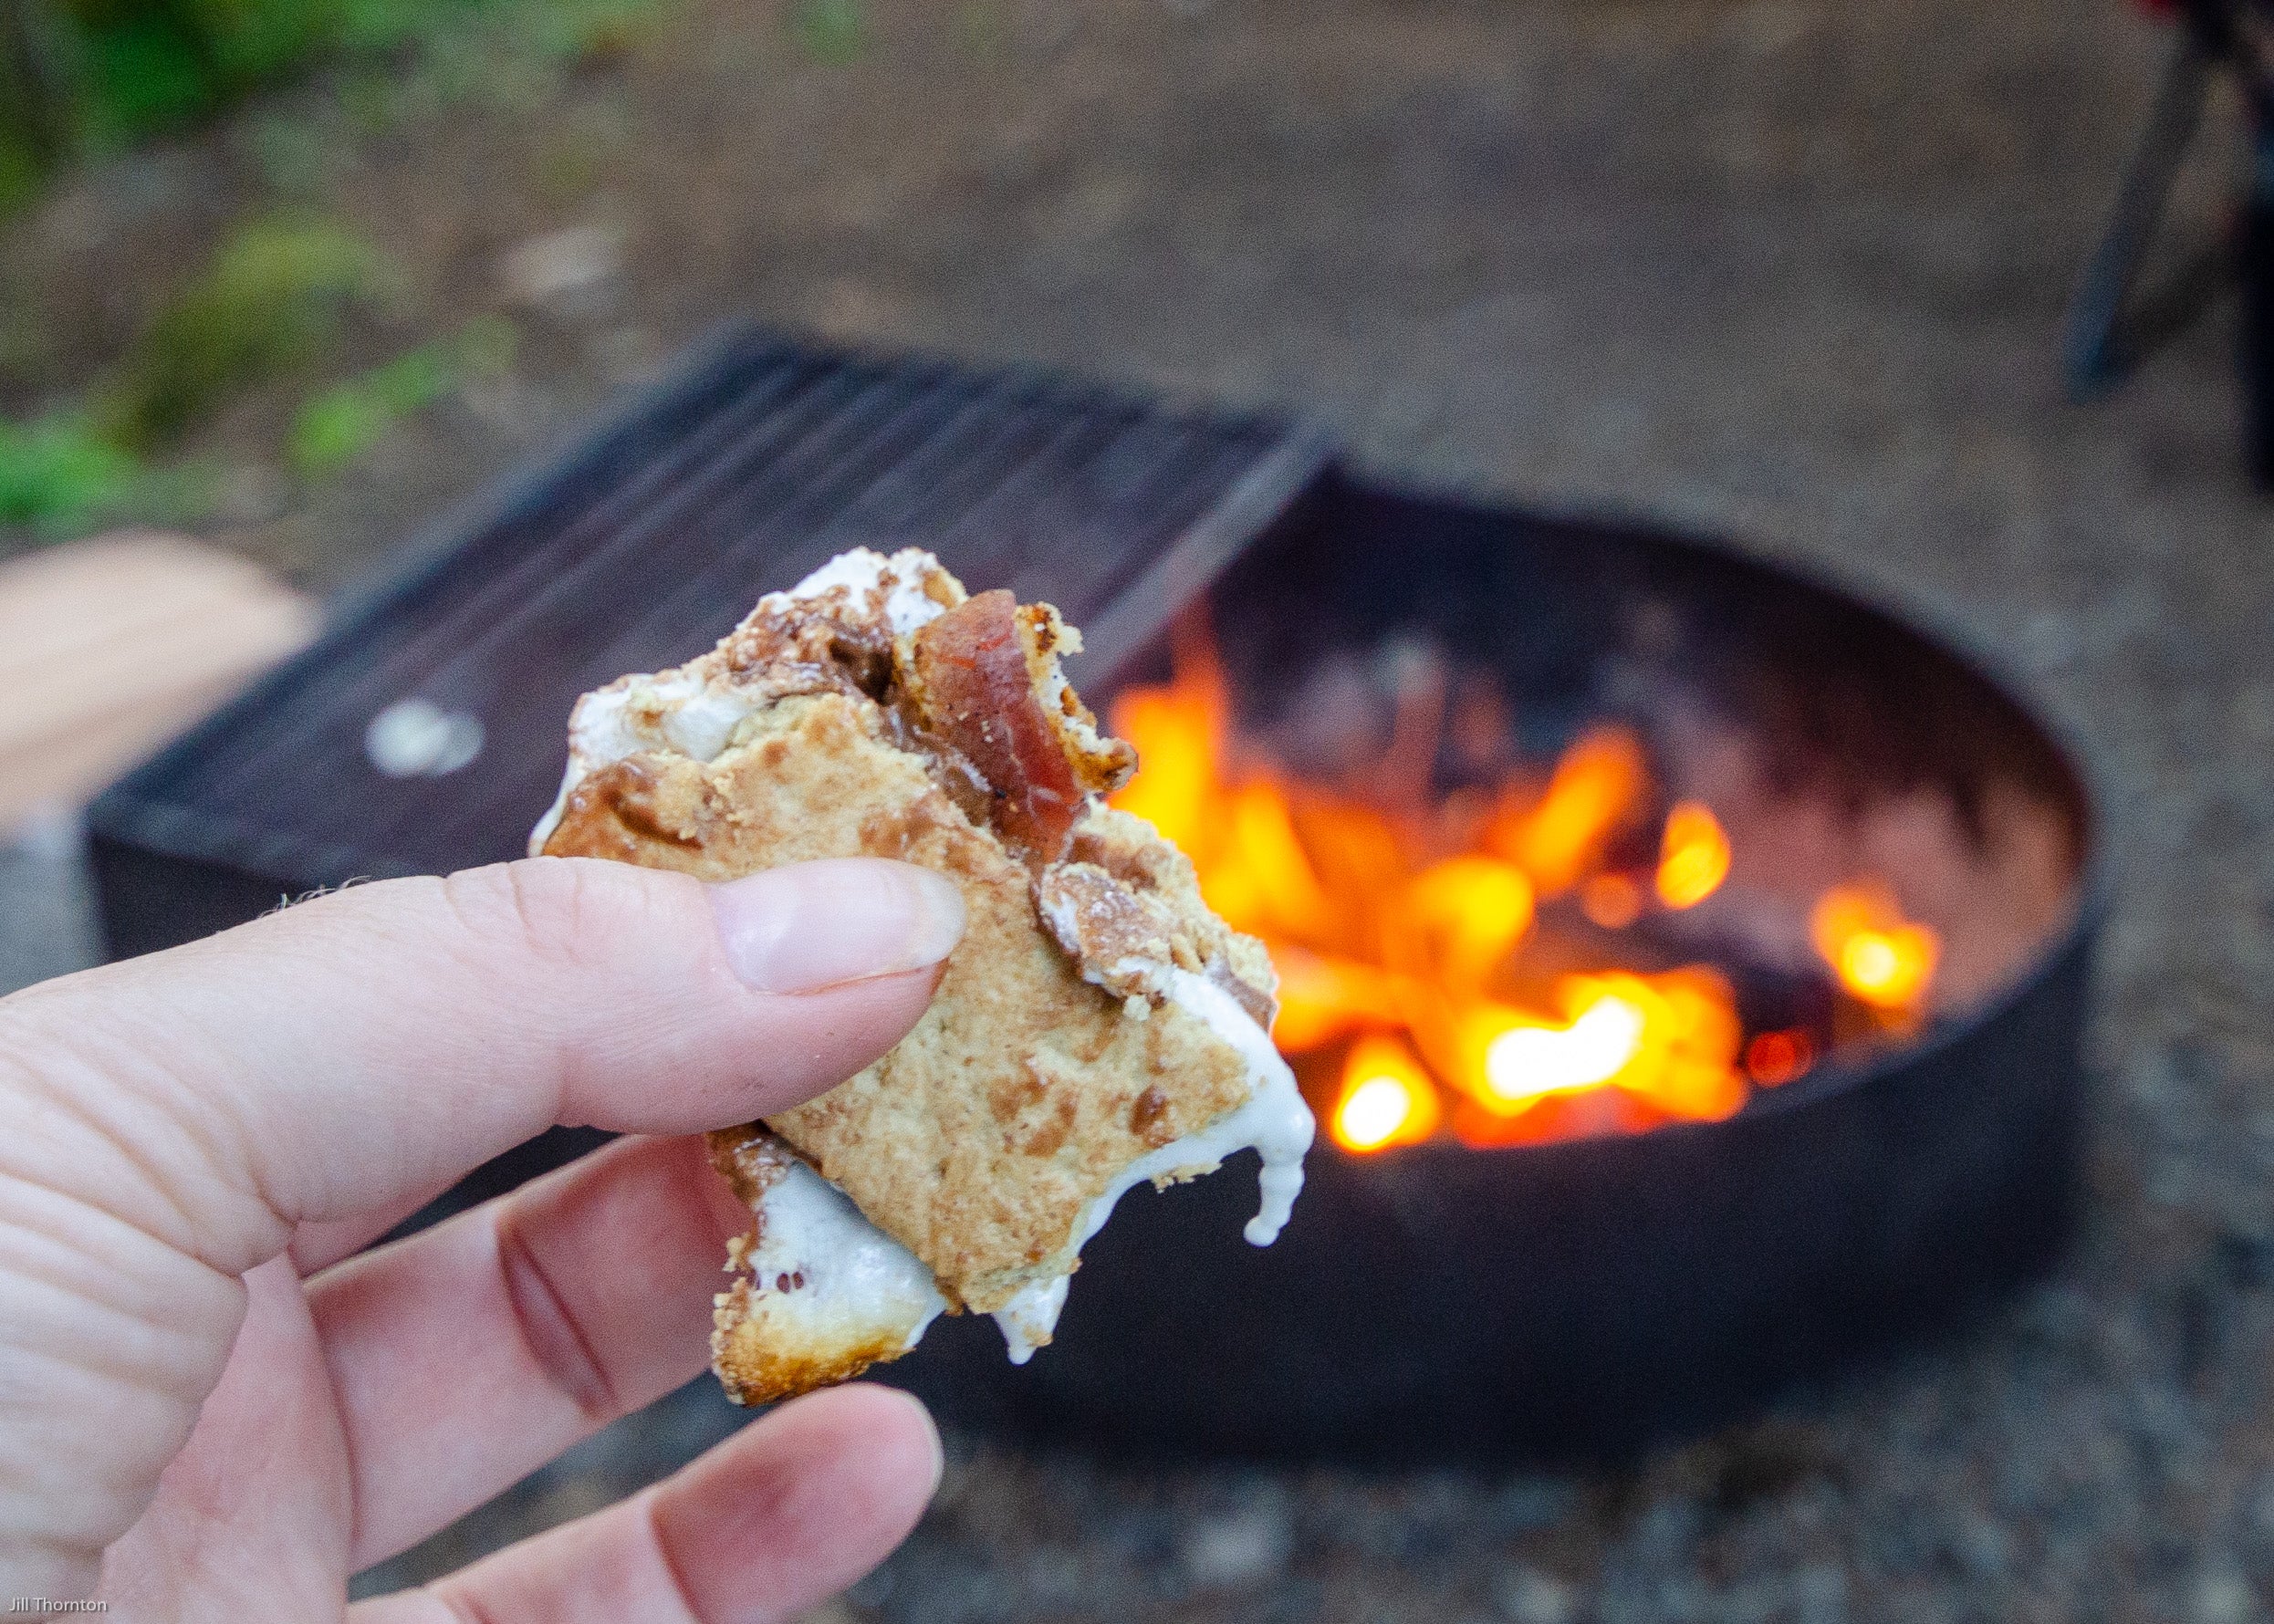 Bacon s'more - Yes, please!!!!